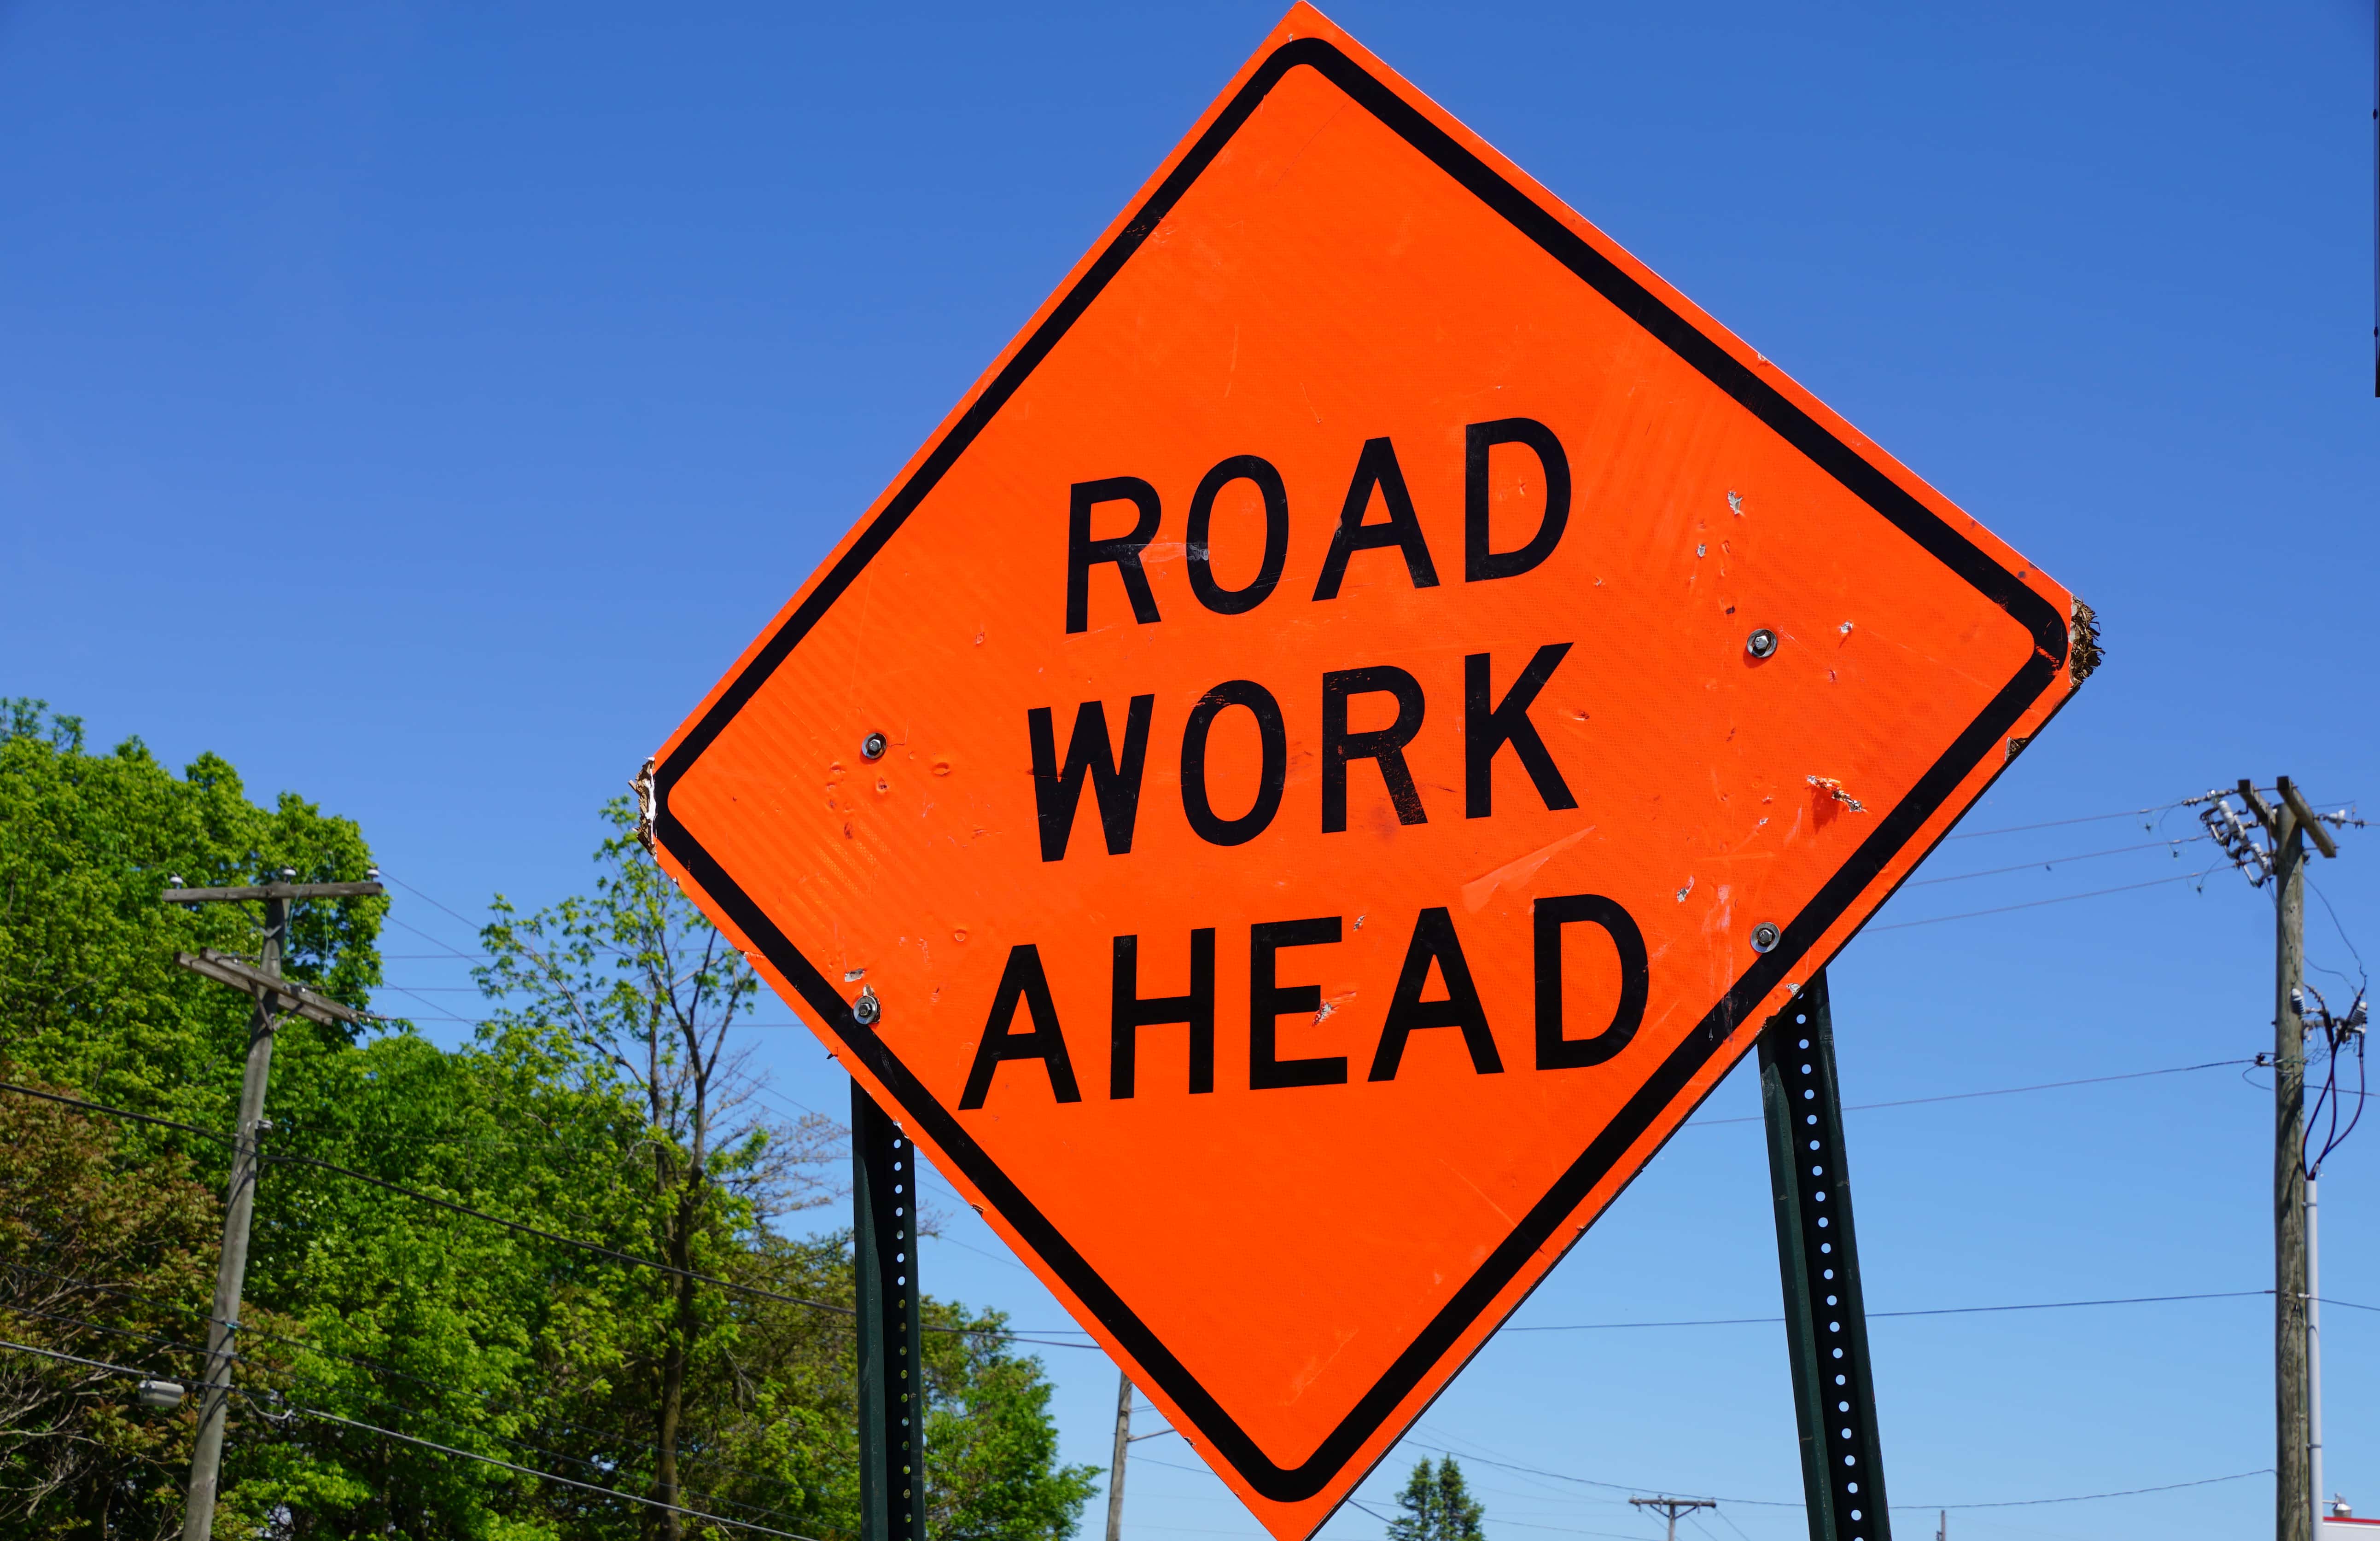 Concrete Patch Work Begins Monday On M-139 in Benton Township | Moody ...